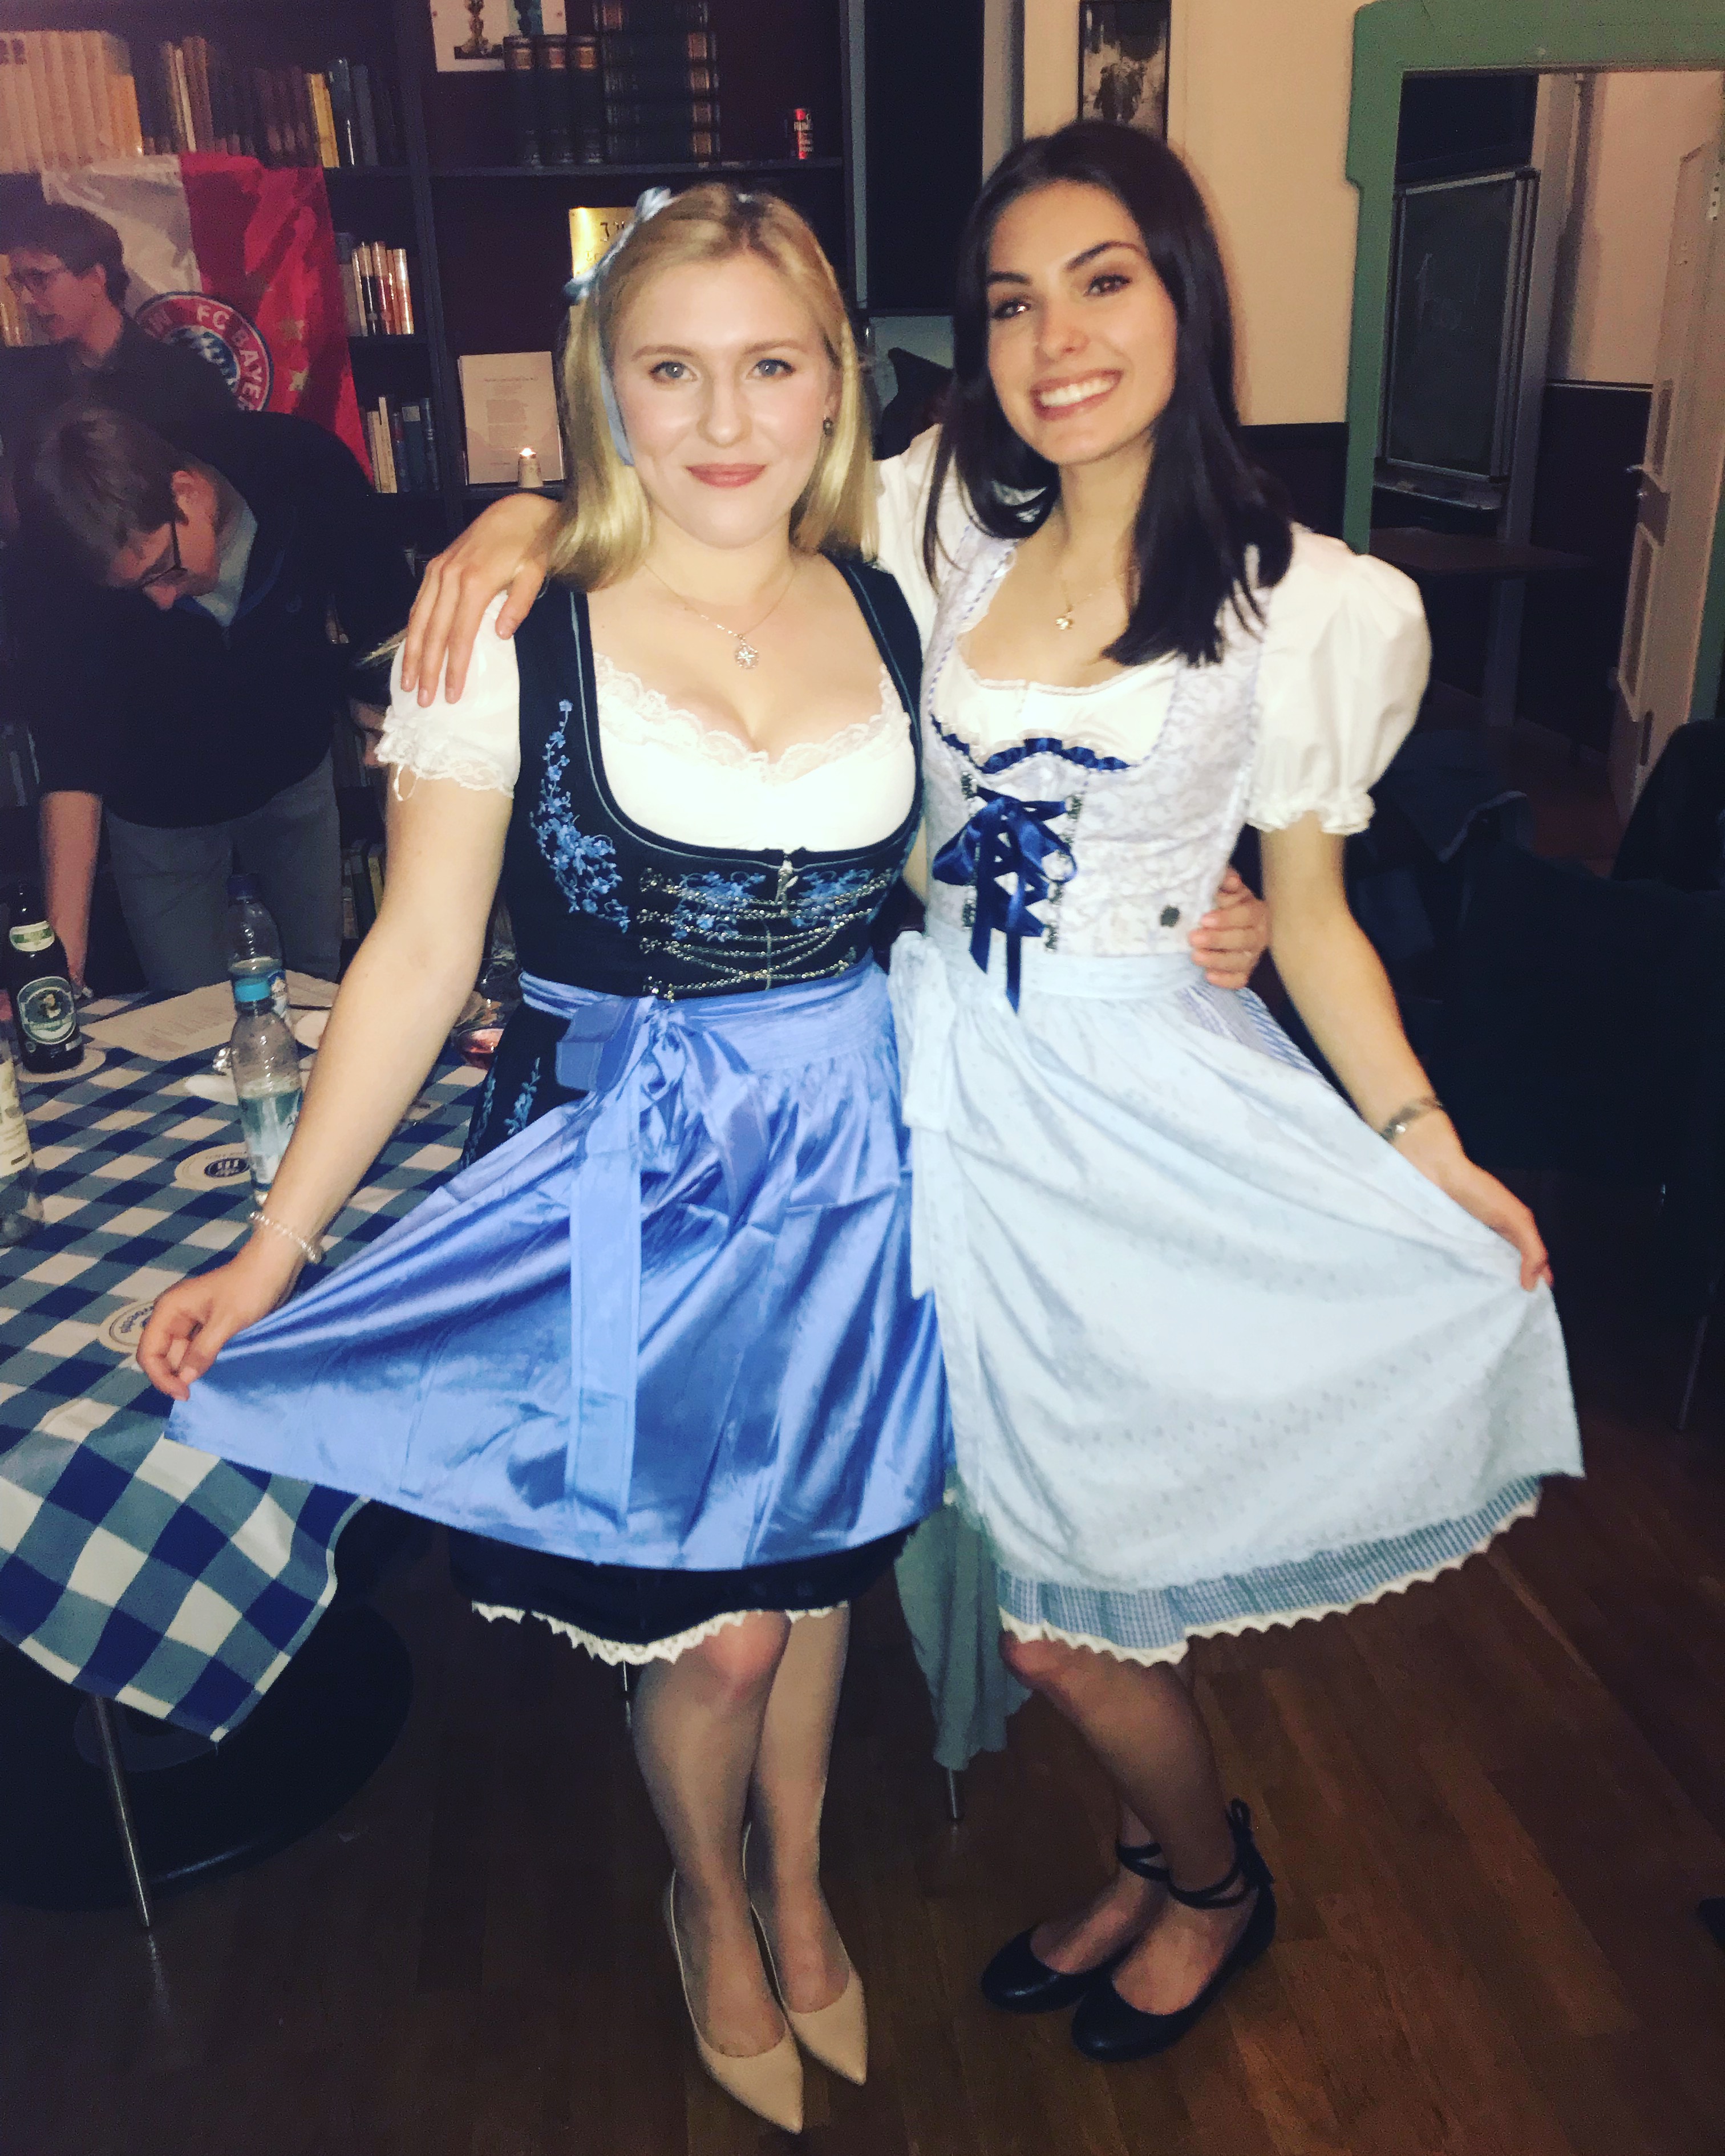 Kathe and friend in traditional Bavarian Dirndl